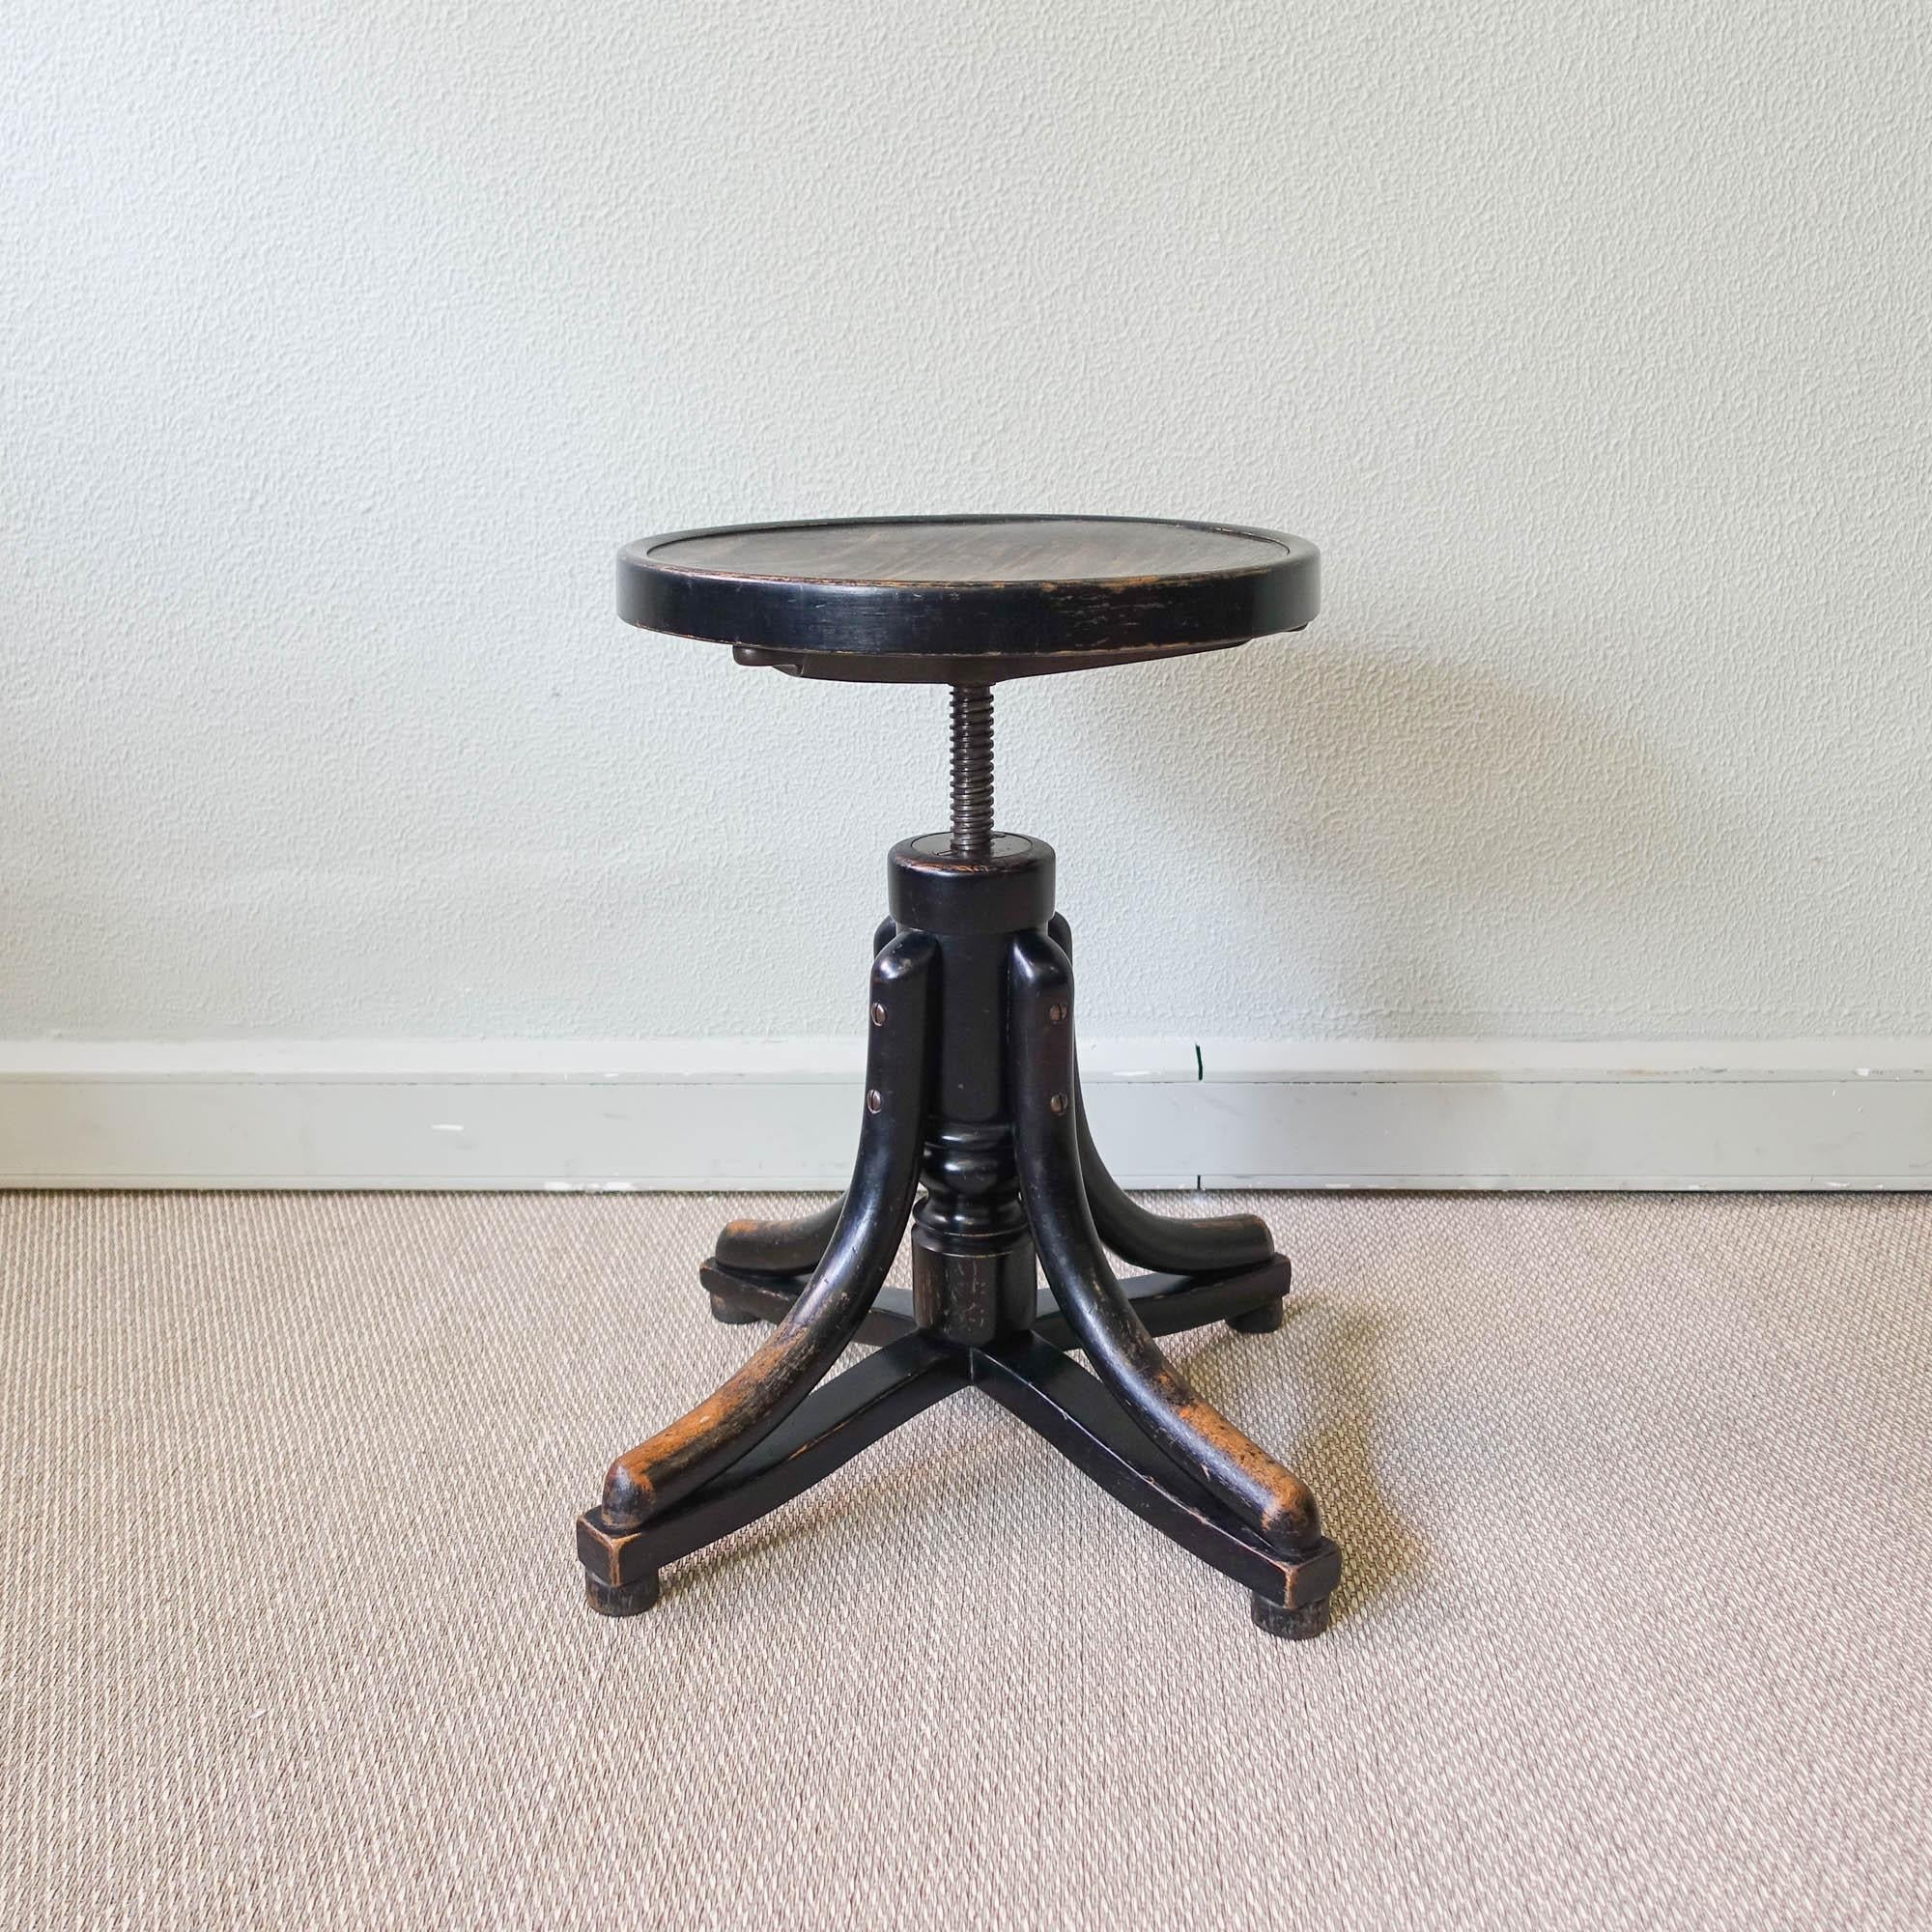 This piano stool was design and produced by Thonet, in Austria, during the 1900's. It is a rare variant of a swivel stool. Bentwood legs with turned wood vertical standard, and wood disk form seat. Seat spins to adjust height (Total H in upper